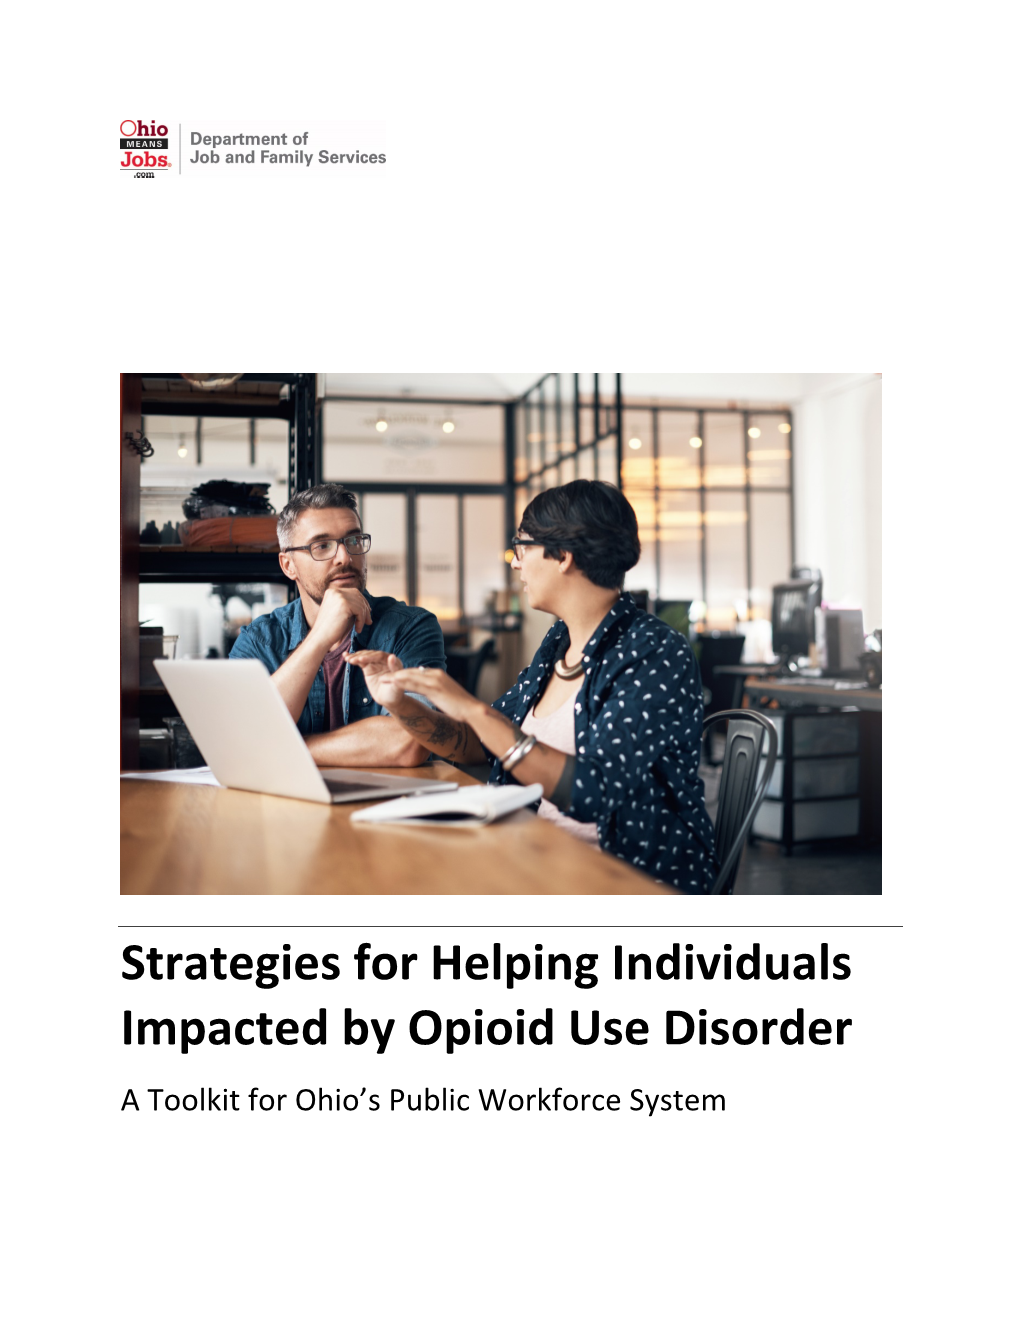 Strategies for Helping Individuals Impacted by Opioid Use Disorder a Toolkit for Ohio’S Public Workforce System